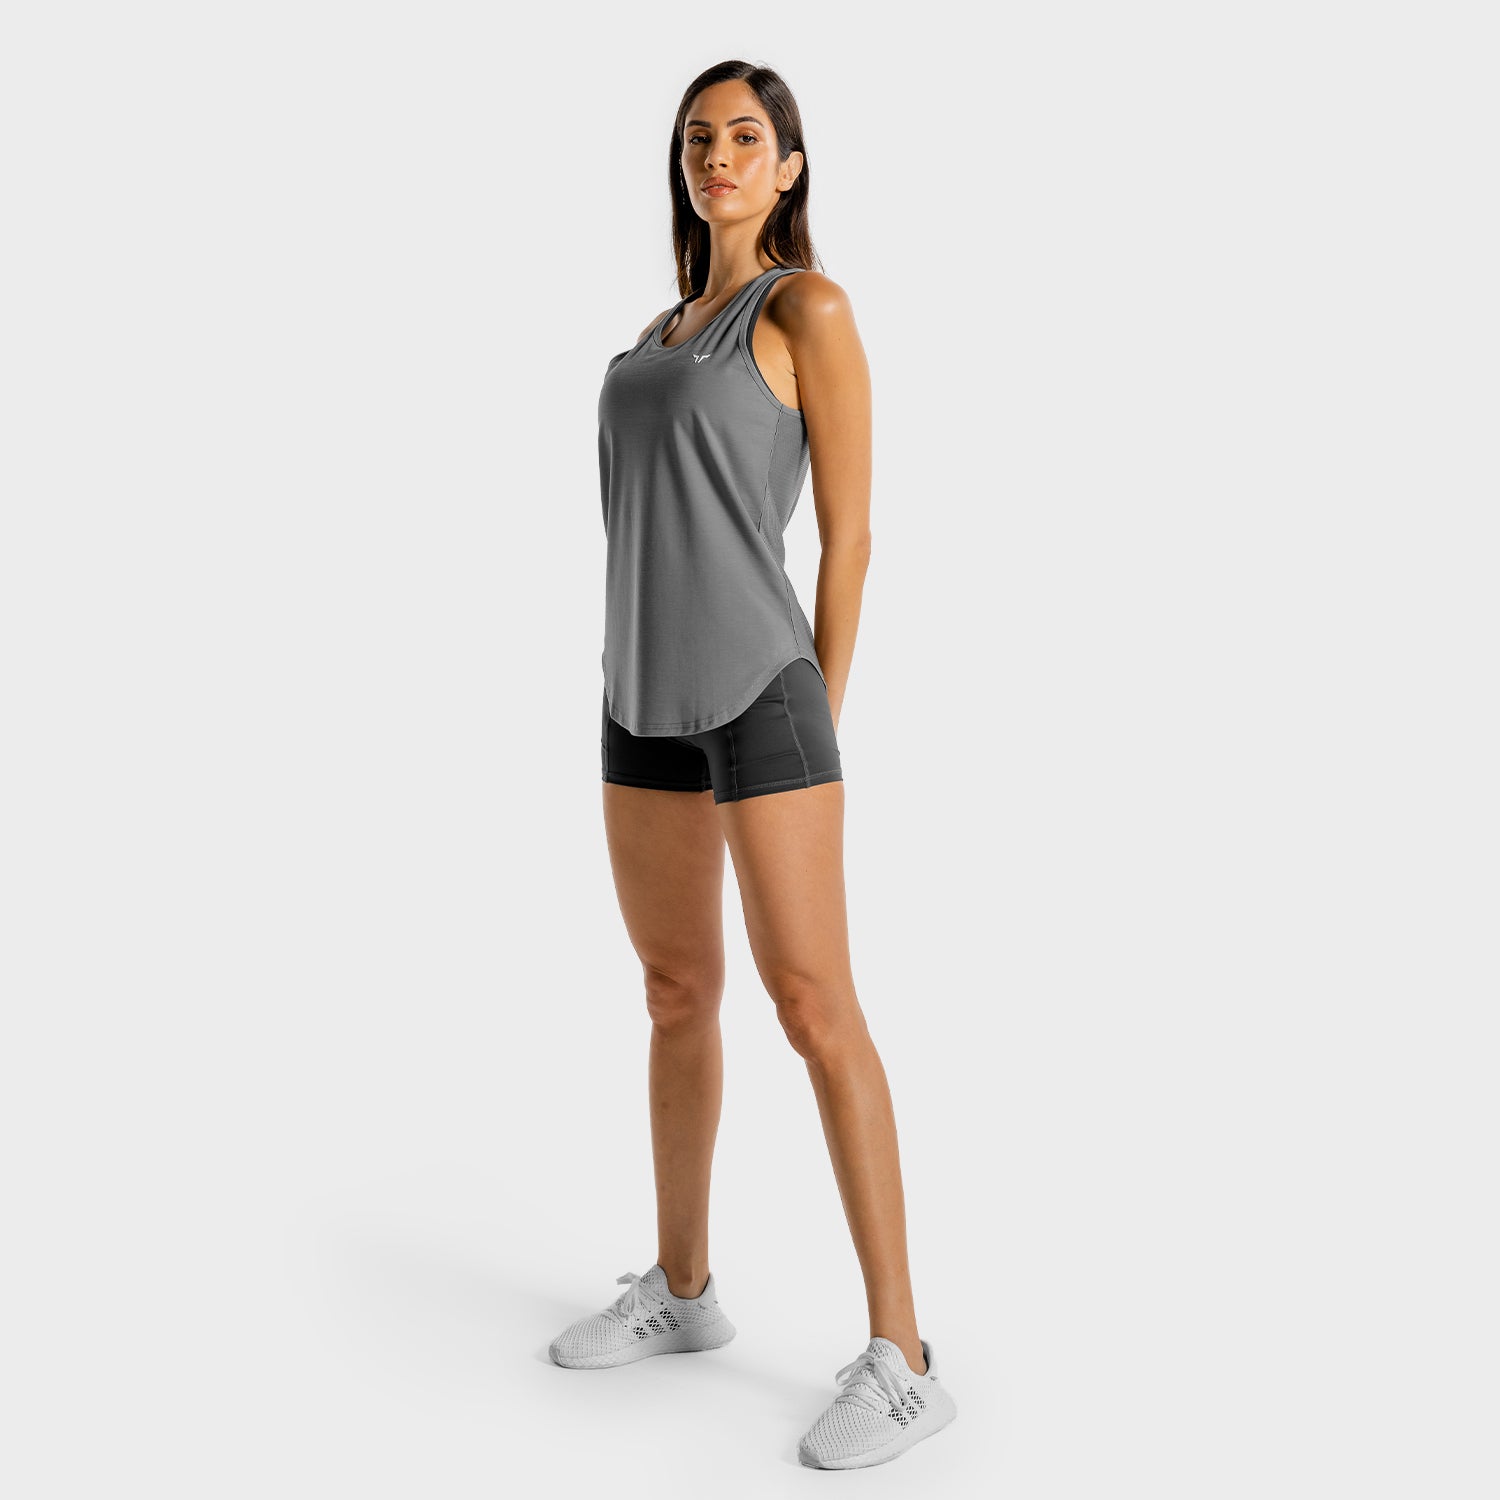 squatwolf-workout-clothes-core-tank-grey-gym-tank-tops-for-women